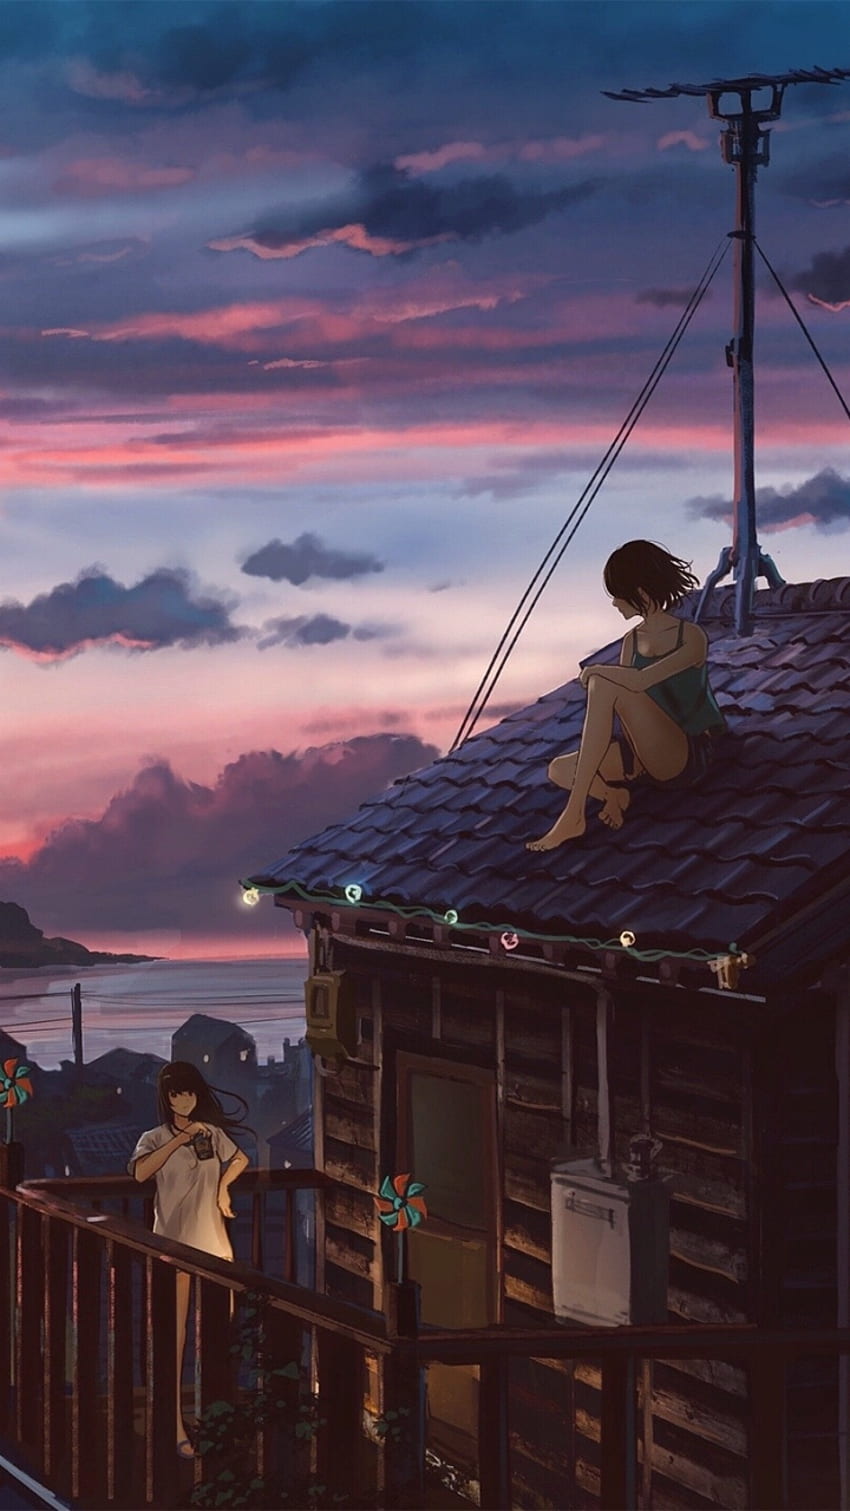 Anime Landscape: Rooftop at sunset anime background